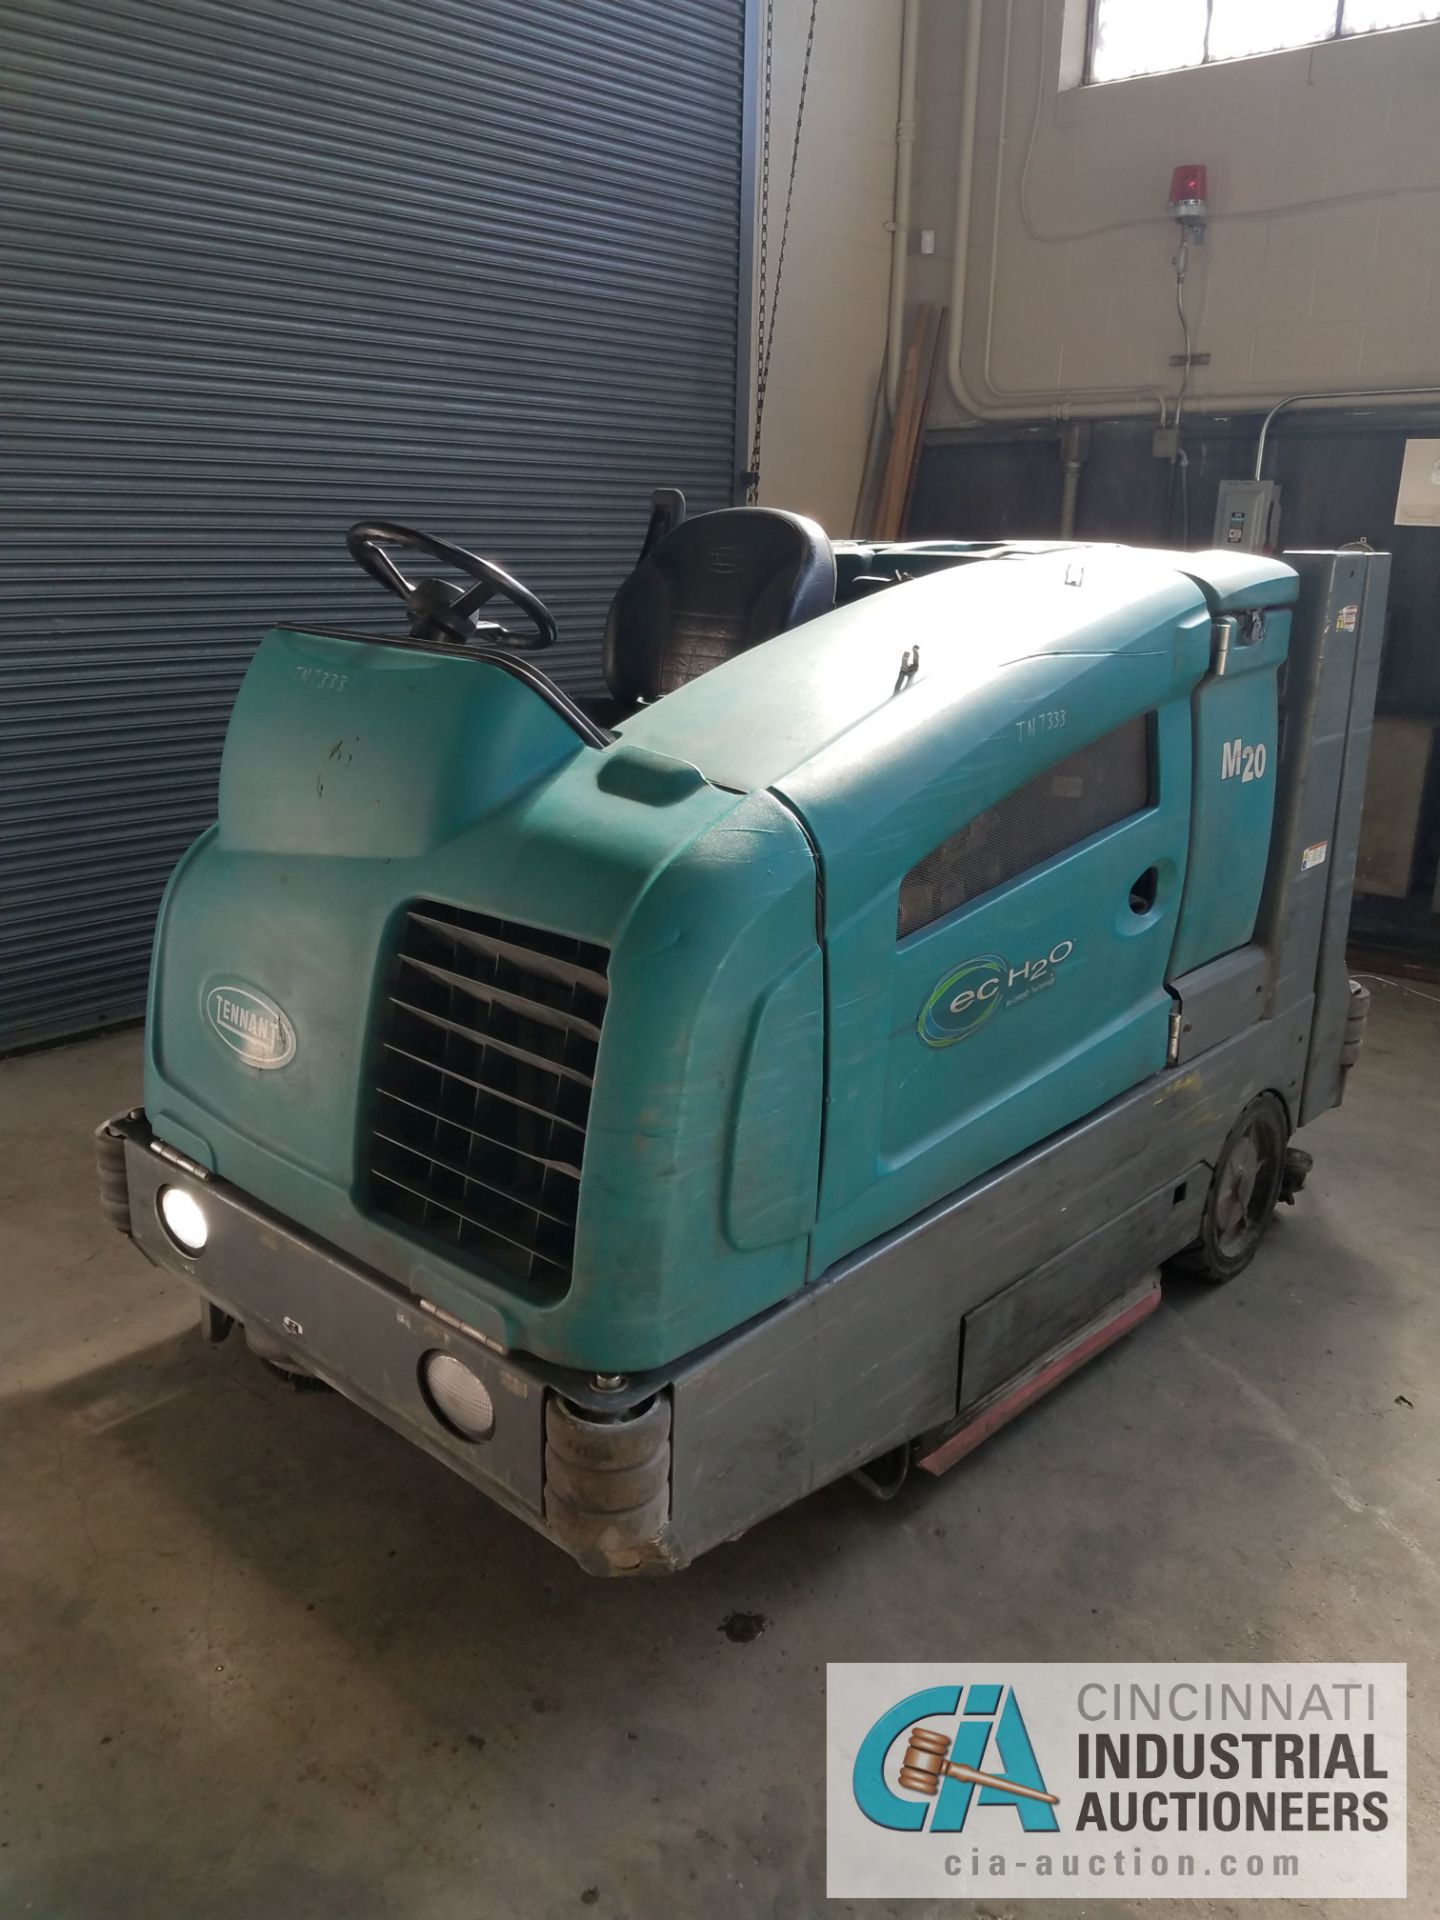 2015 TENNANT MODEL M20 SWEEPER / SCRUBBER LP GAS, 58" CLEANING PATHE, 3,007 HOURS - Image 4 of 7